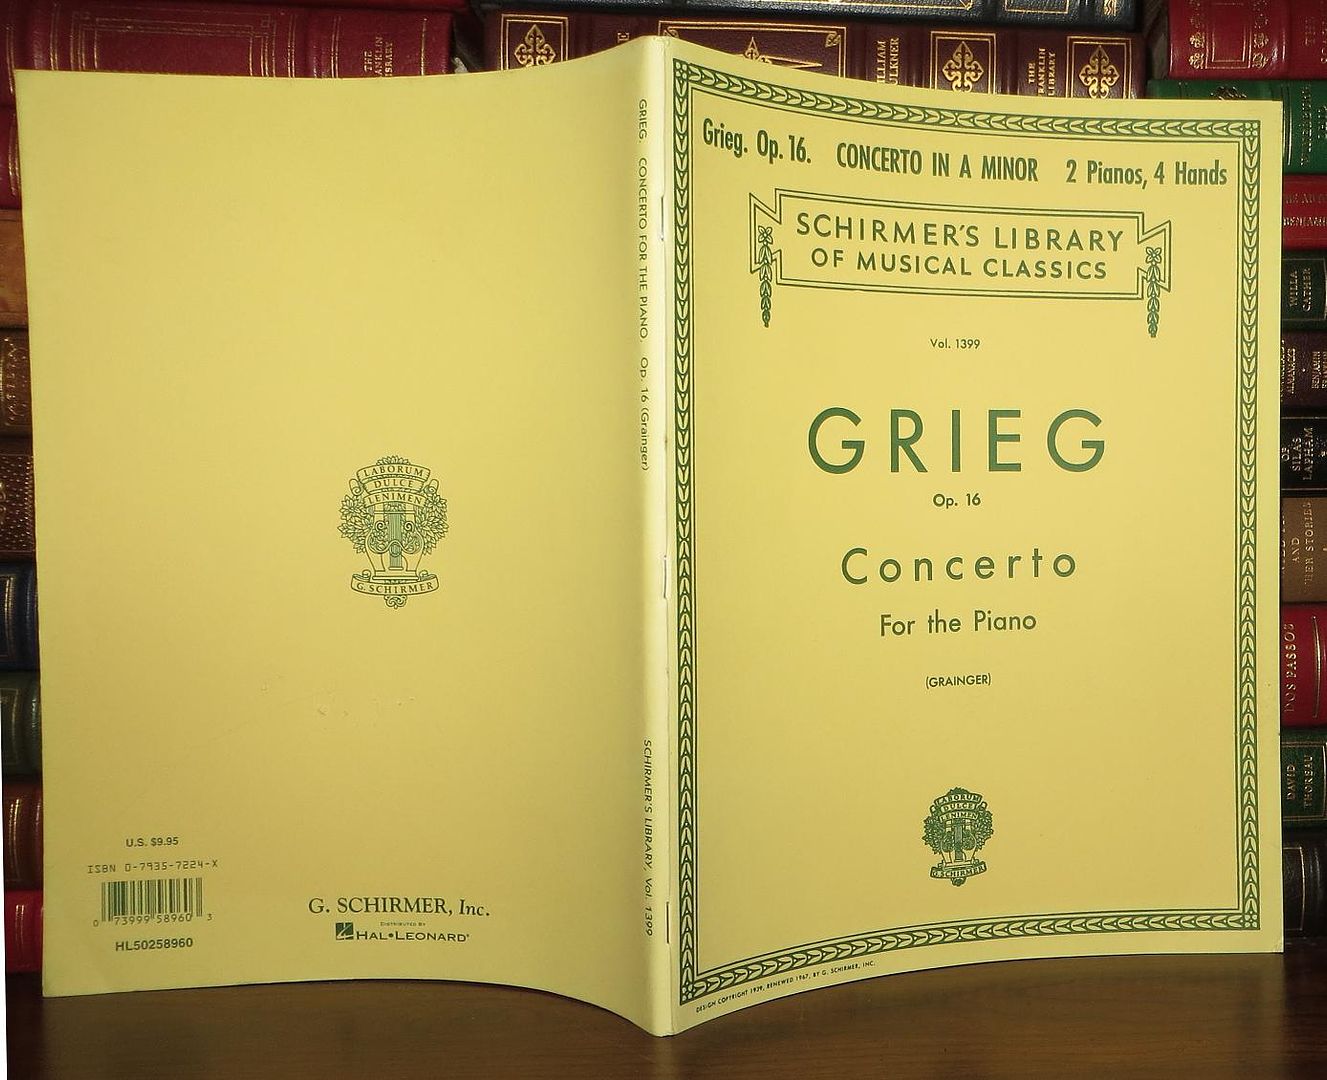 GRIEG, EDVARD [EDWARD] - Concerto for the Piano Op. 16, Concerto in 